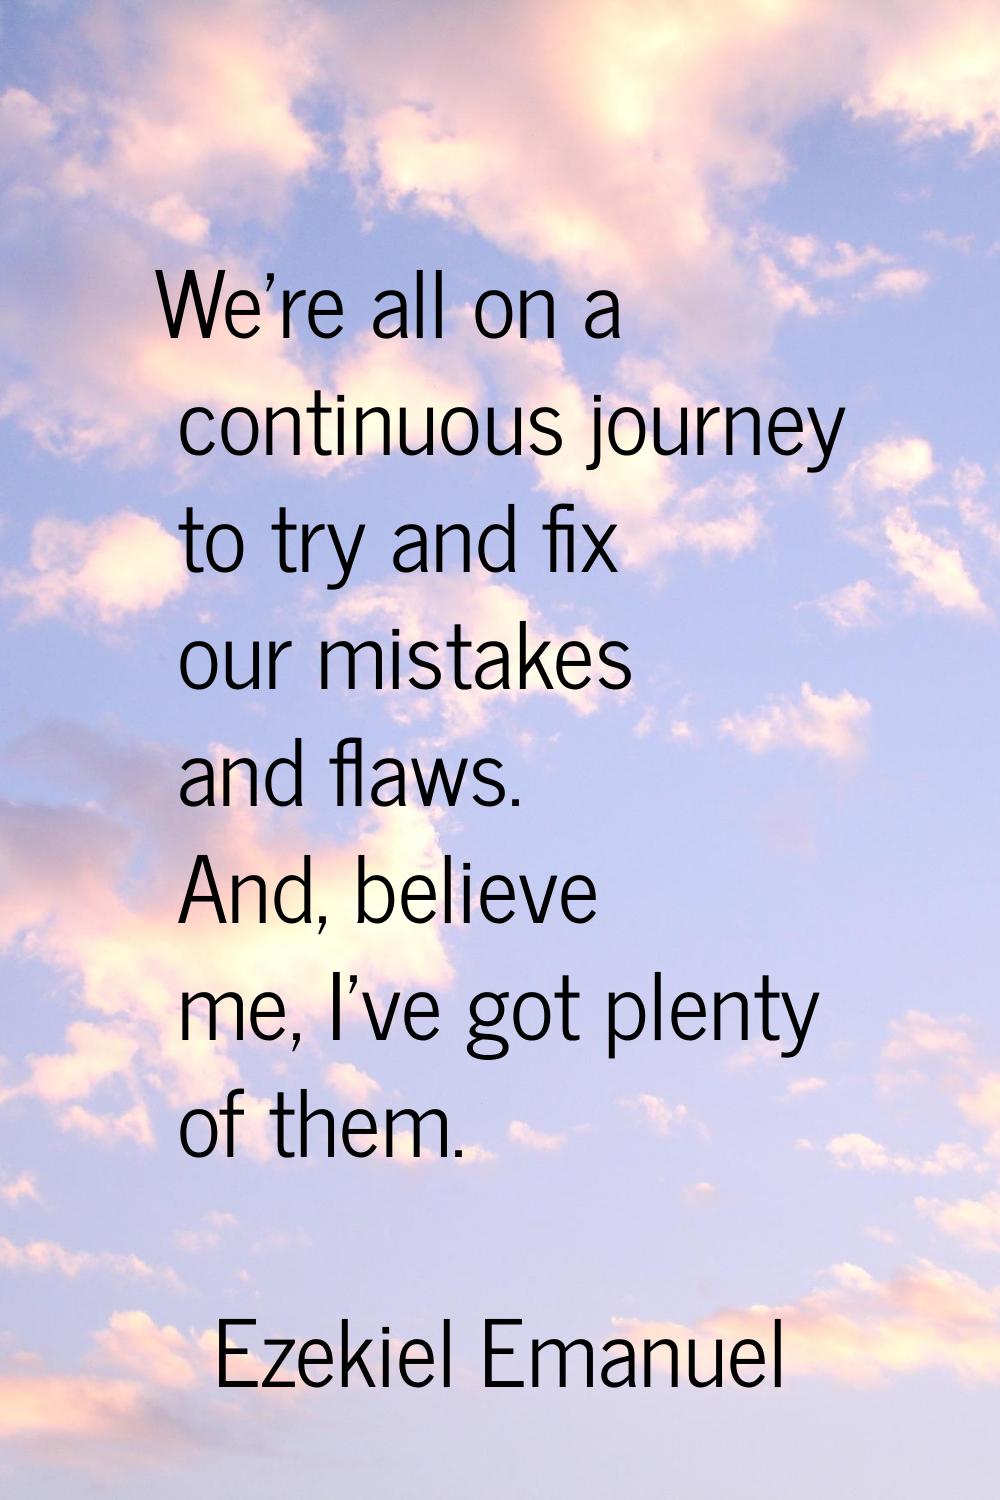 We're all on a continuous journey to try and fix our mistakes and flaws. And, believe me, I've got 